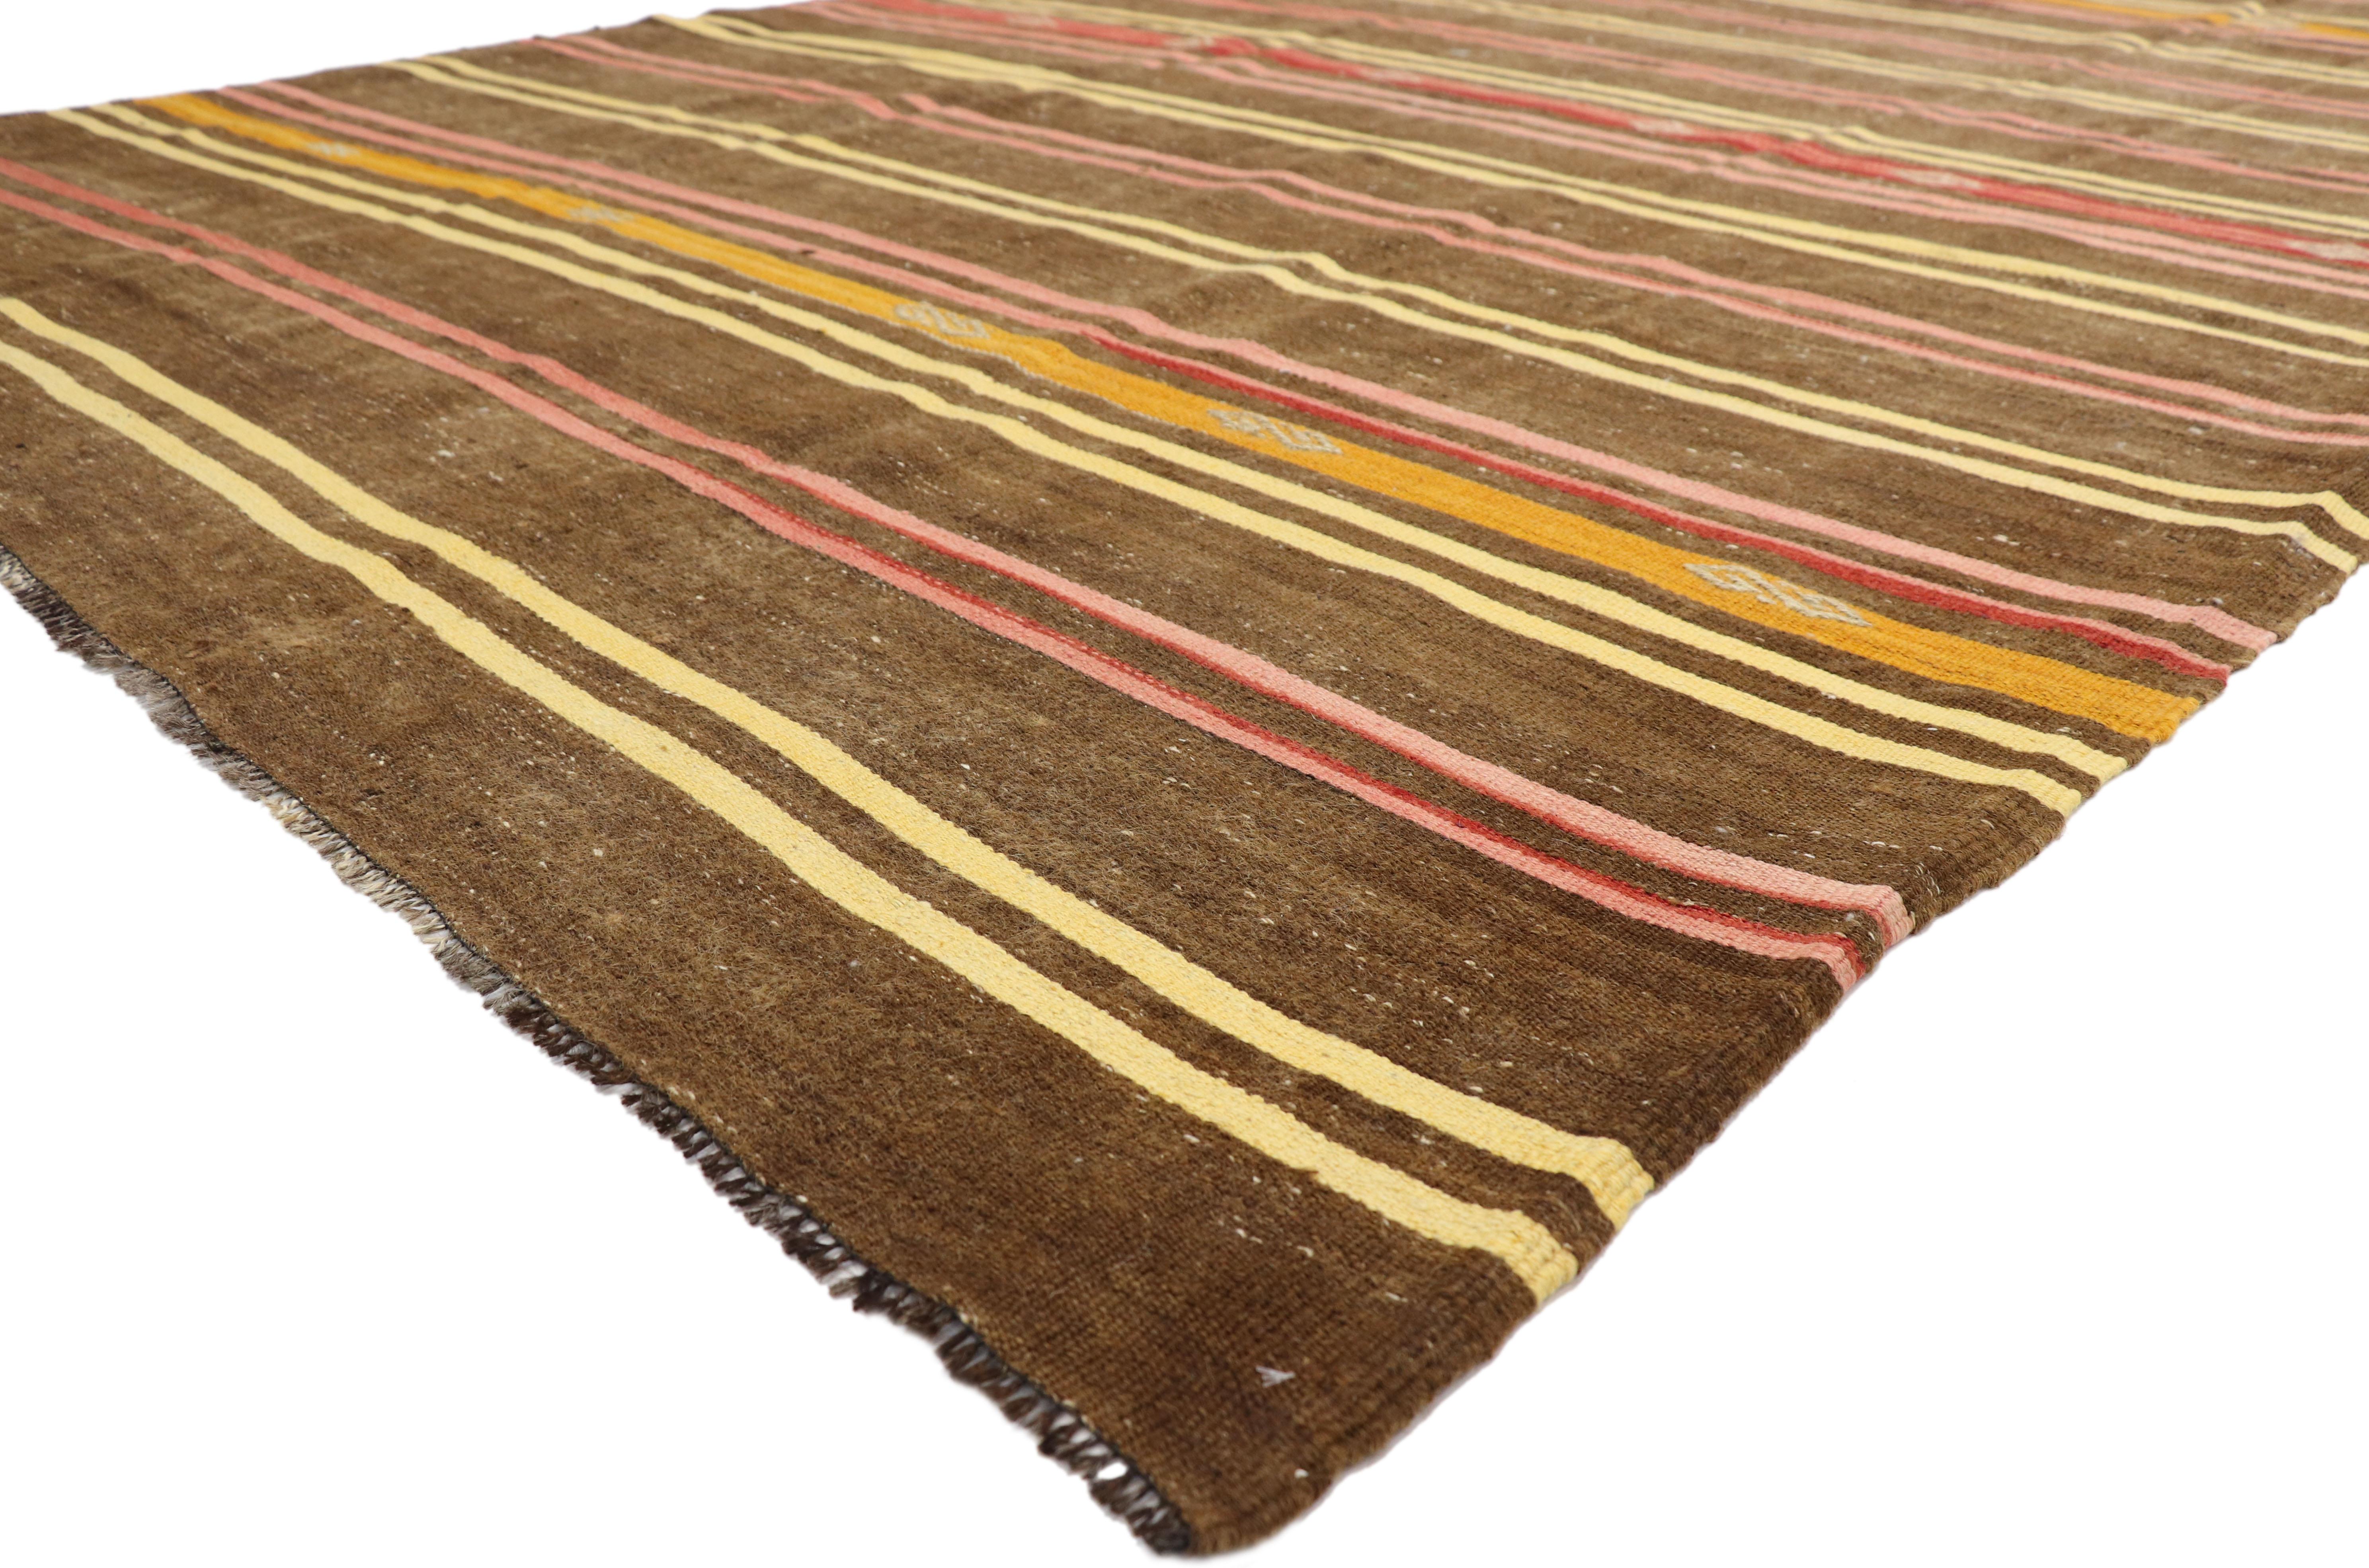 51075 Vintage Turkish Kilim Rug with Bohemian Tribal Design and Modern Cabin Style. Create a comfortable and modern setting with this hand-woven wool vintage Turkish Kilim rug. The flat-weave kilim rug features a few symbolic tribal motifs and